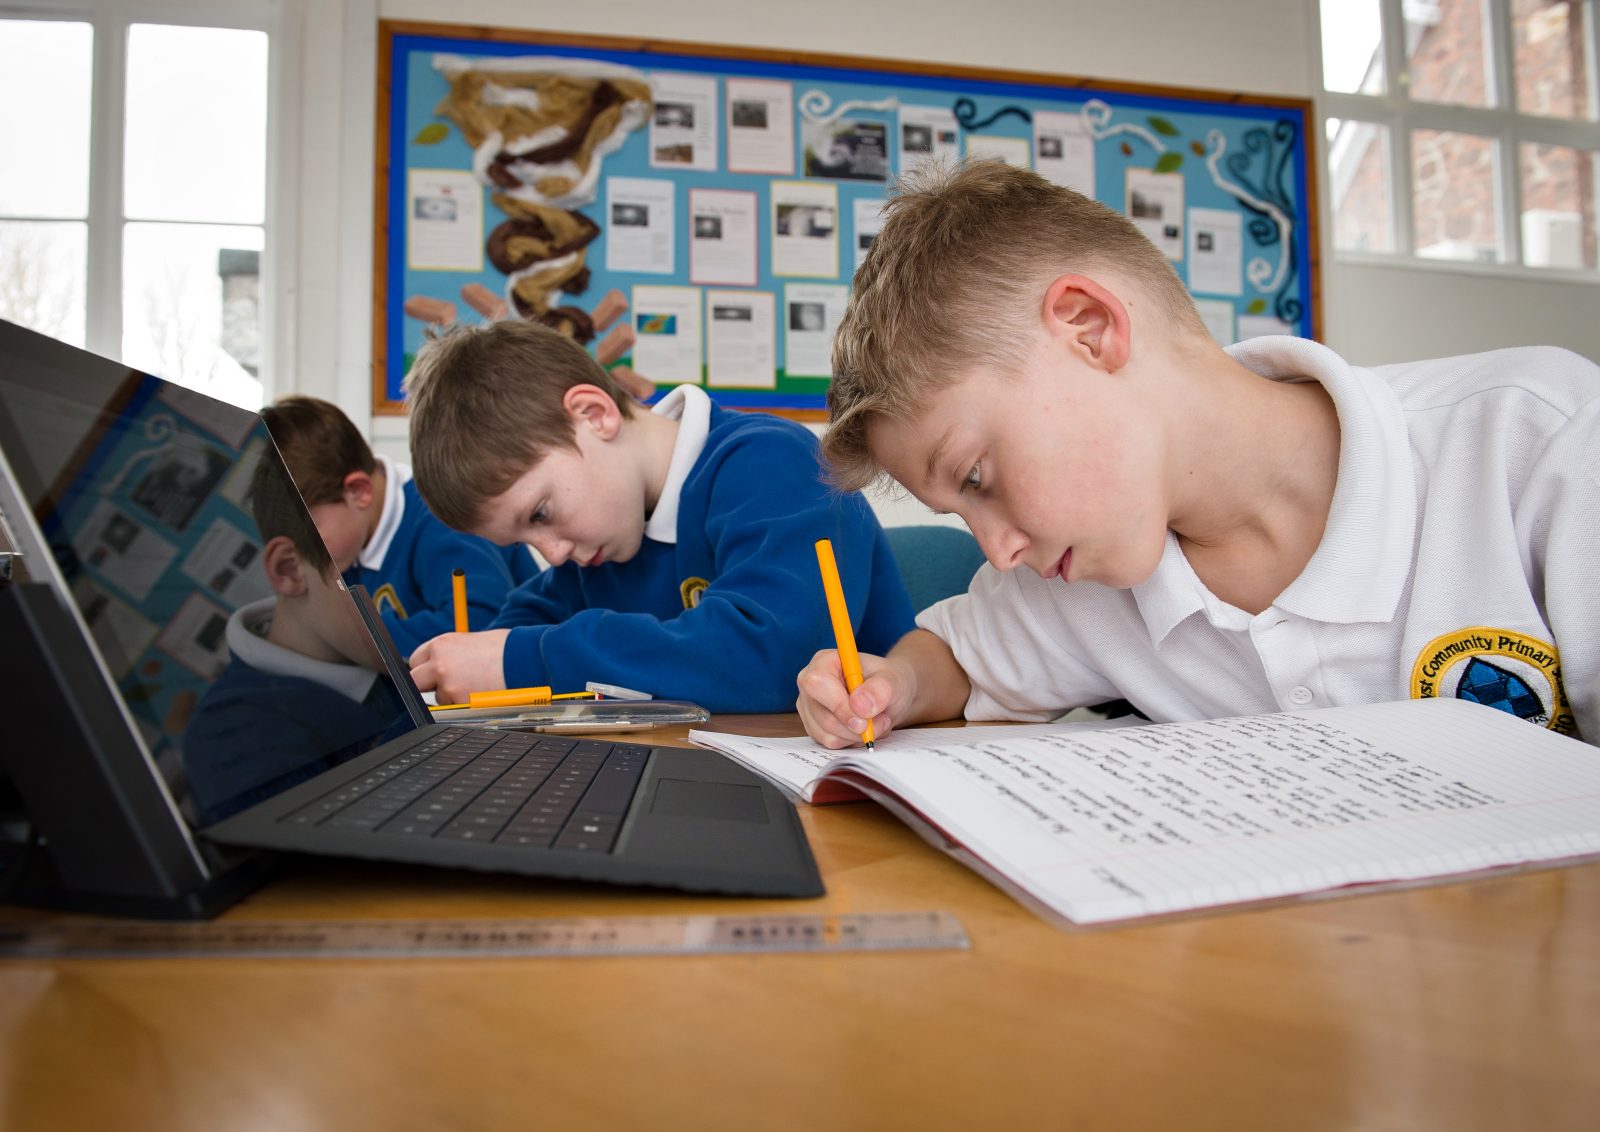 Pupils at Cornerstone Academy Trust use laptops as part of their school work. Here they are writing in their school notebooks while having laptops set out in front of them. 